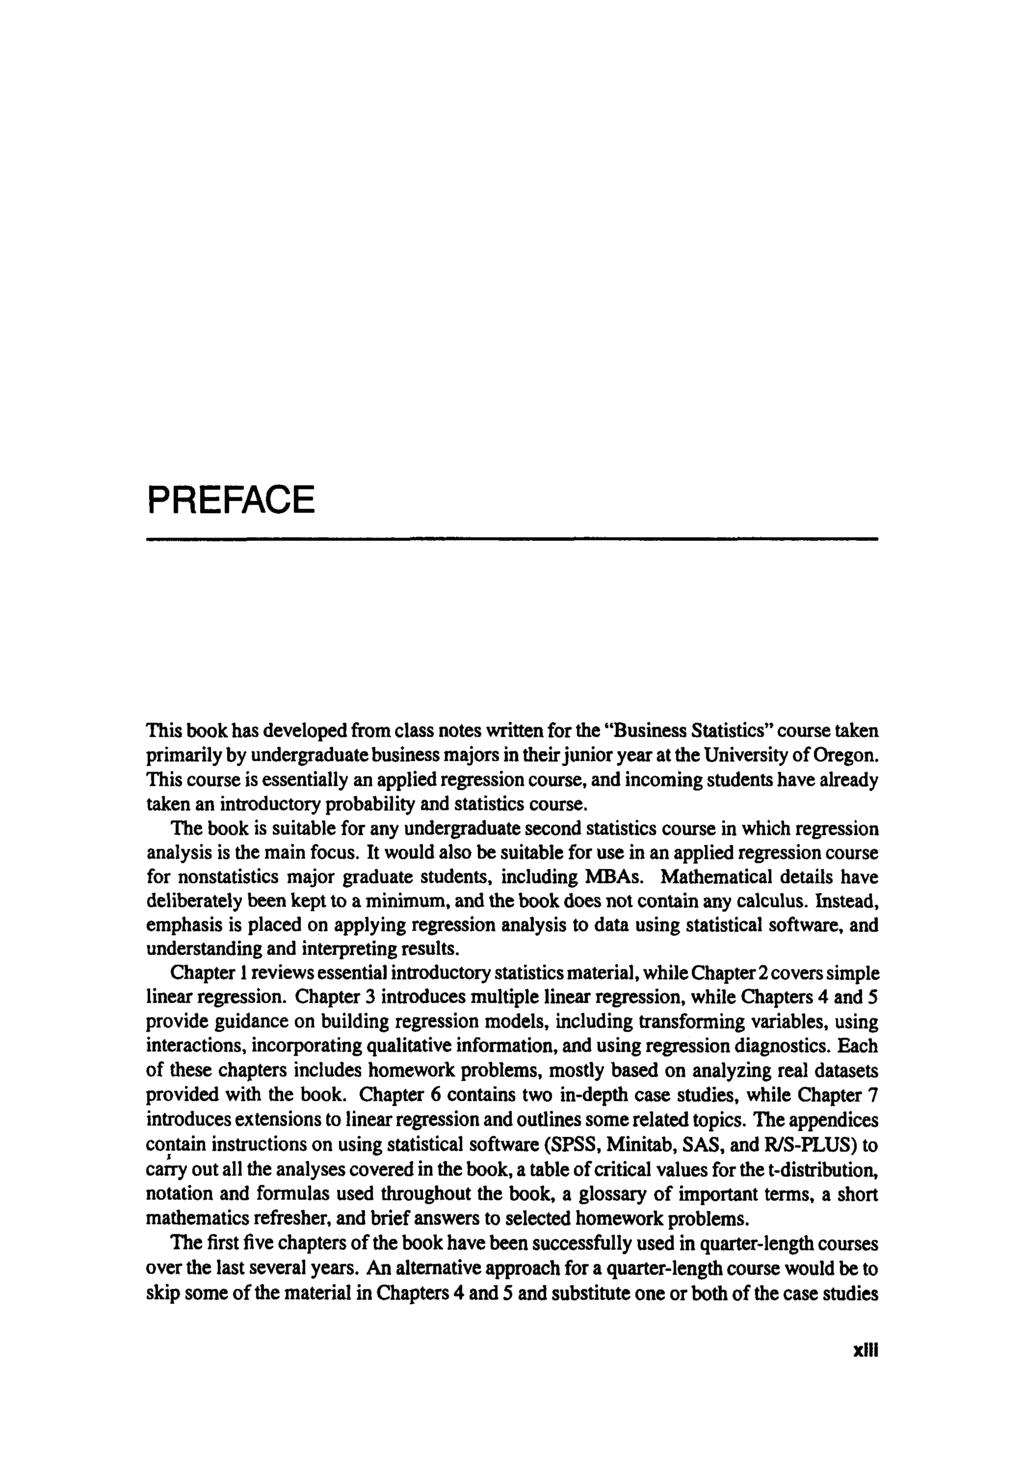 PREFACE This book has developed from class notes written for the "Business Statistics" course taken primarily by undergraduate business majors in their junior year at the University of Oregon.